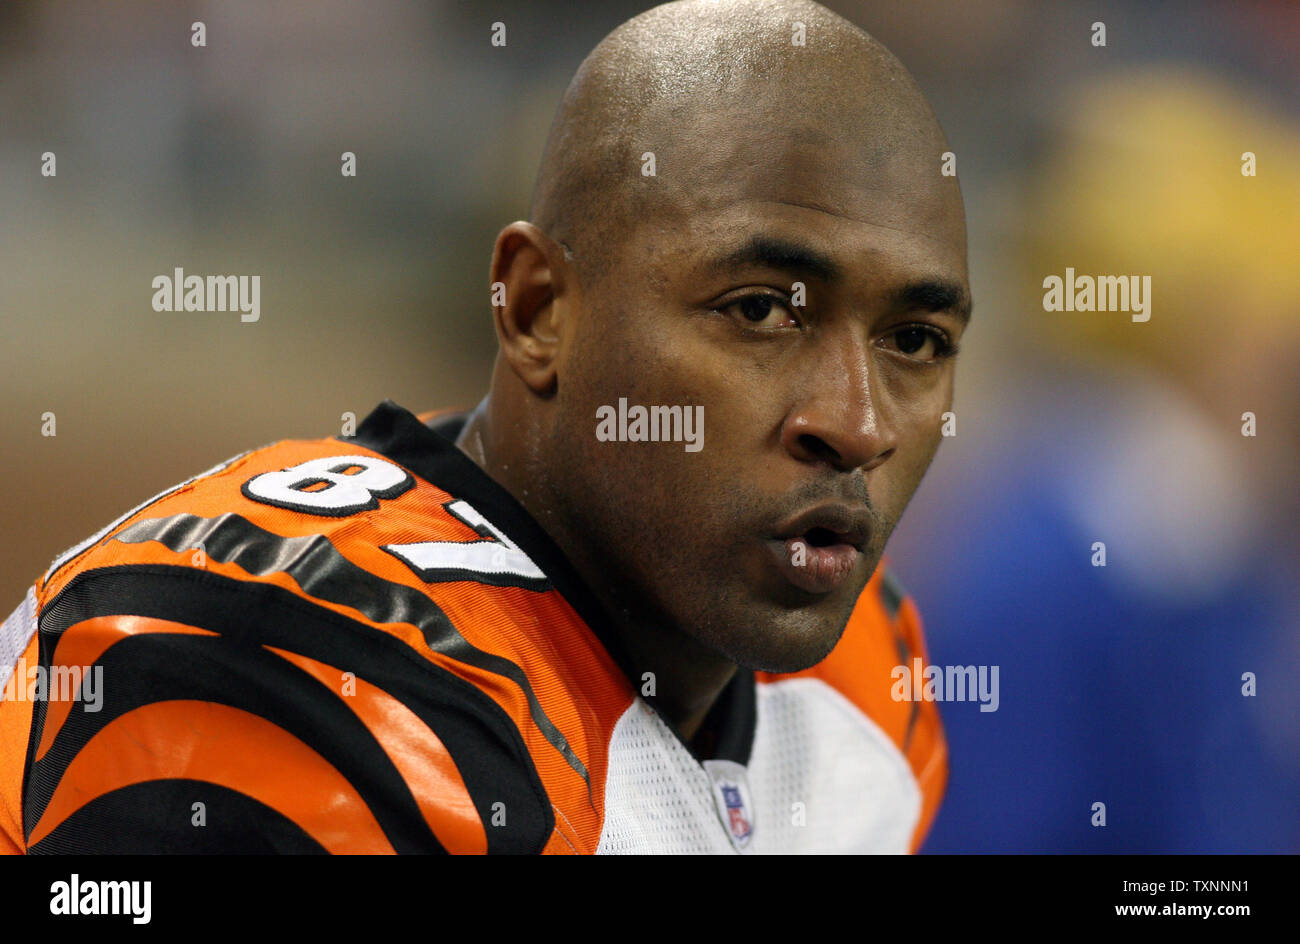 Cincinnati Bengals wide receiver Kelley Washington (87) takes deep breaths to catch his breath in the fourth quarter against the Detroit Lions December 18, 2005 at Ford Field in Detroit.  (UPI Photo/Scott R. Galvin) Stock Photo